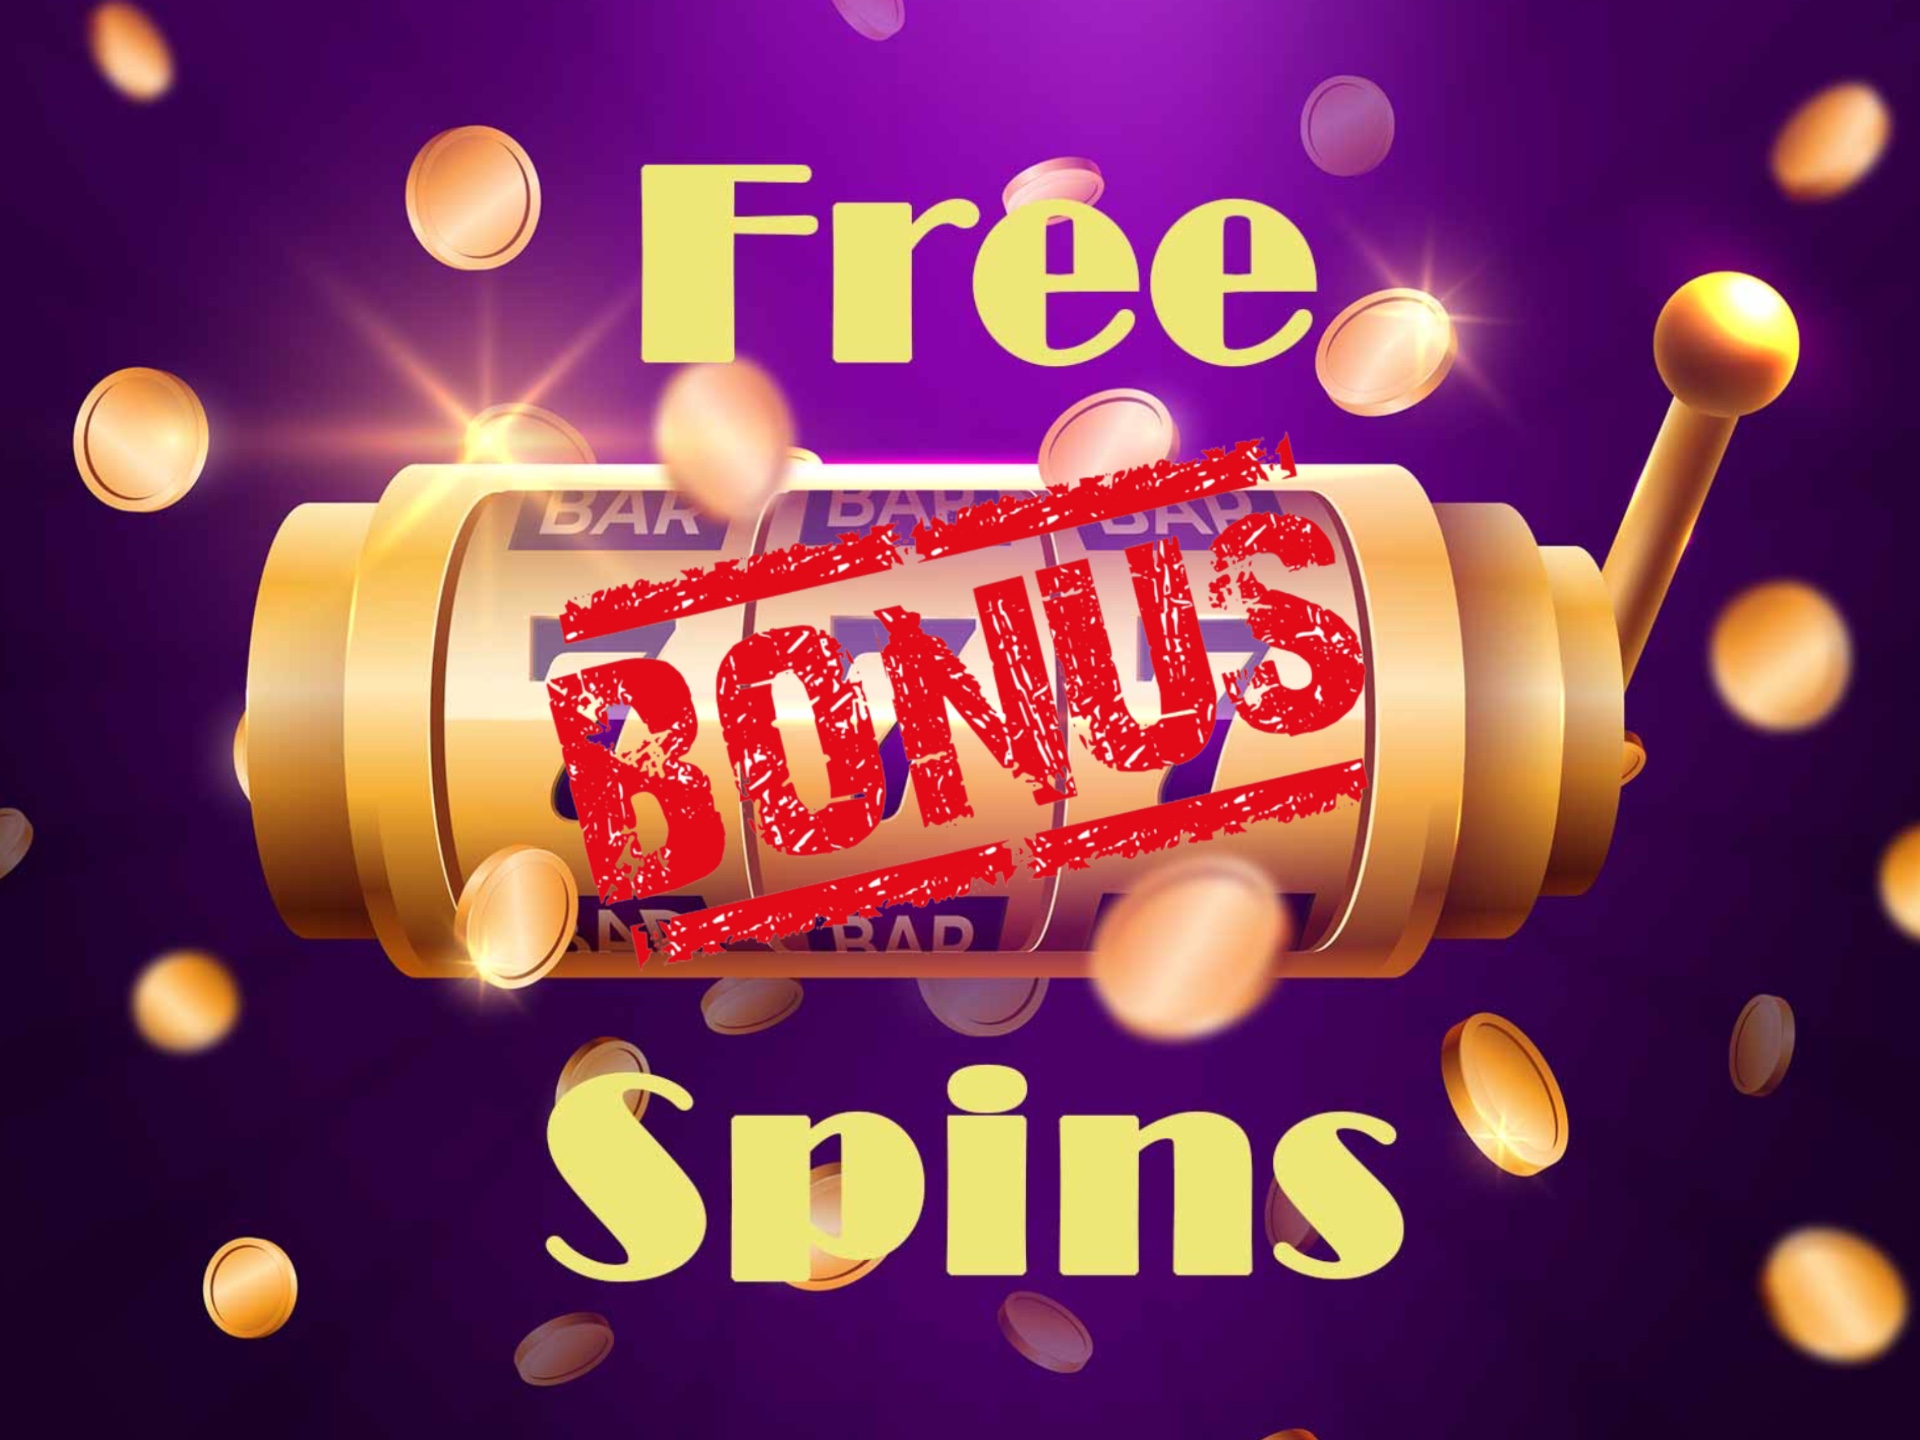 Free spins usually go as an addition to welcome or no-deposit bonus at an online casino.